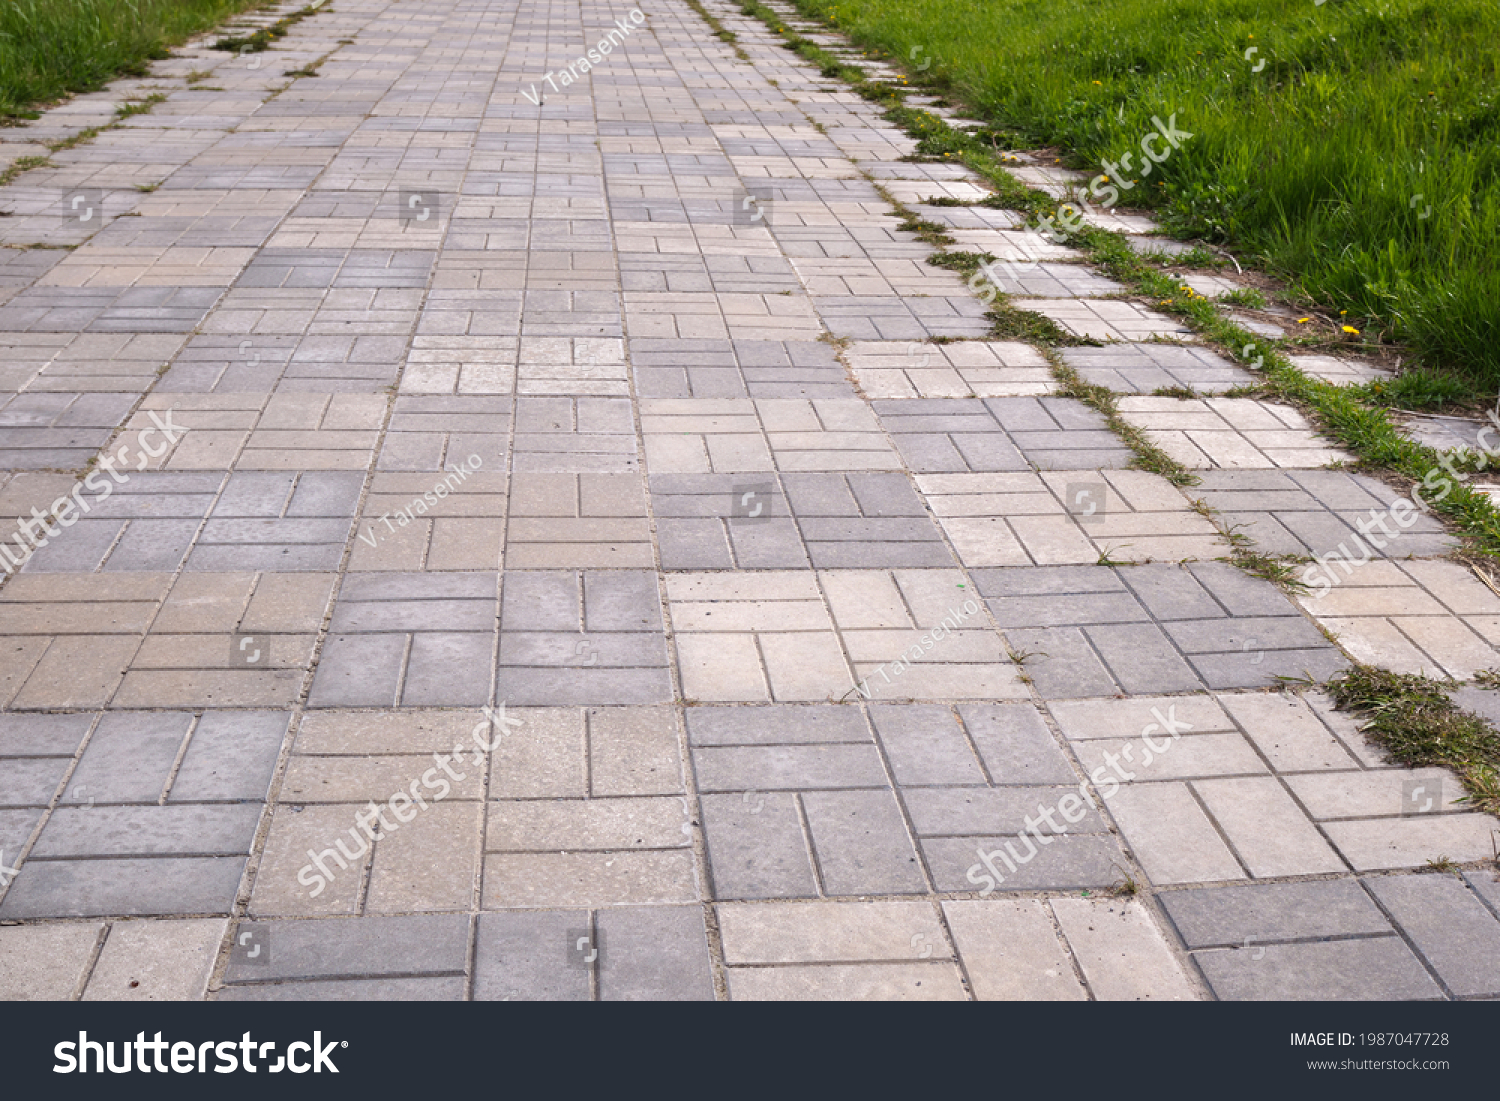 Concrete bricks footpath on the green grass in the park, abstract background of tiles, footpath, sidewalk,  #1987047728